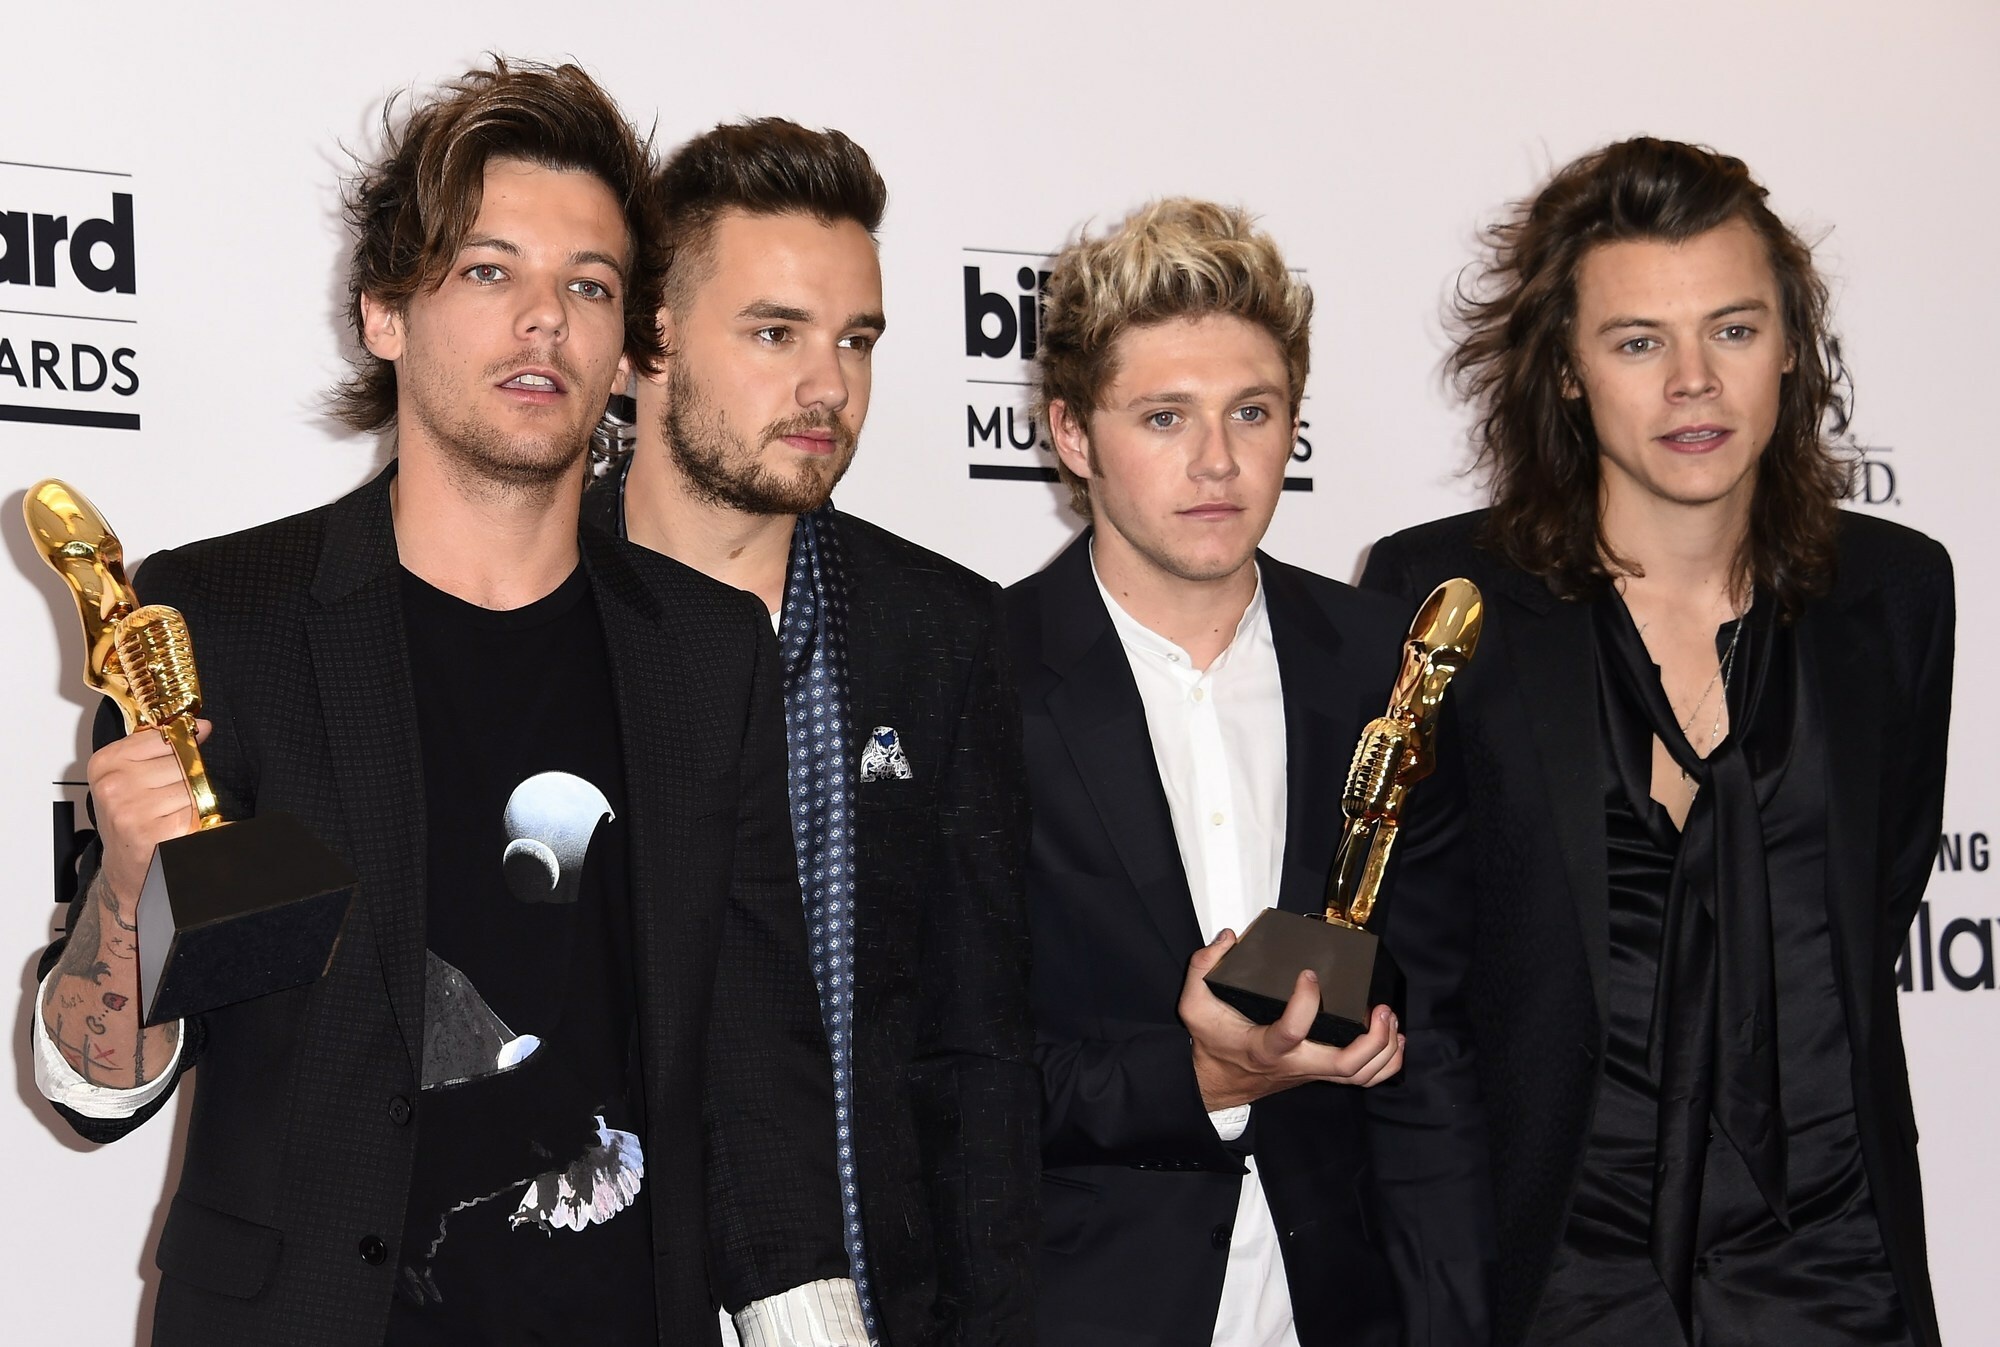 One Direction (Band): Louis Tomlinson, Liam Payne, Niall Horan, Harry Styles, Award winners. 2000x1350 HD Background.